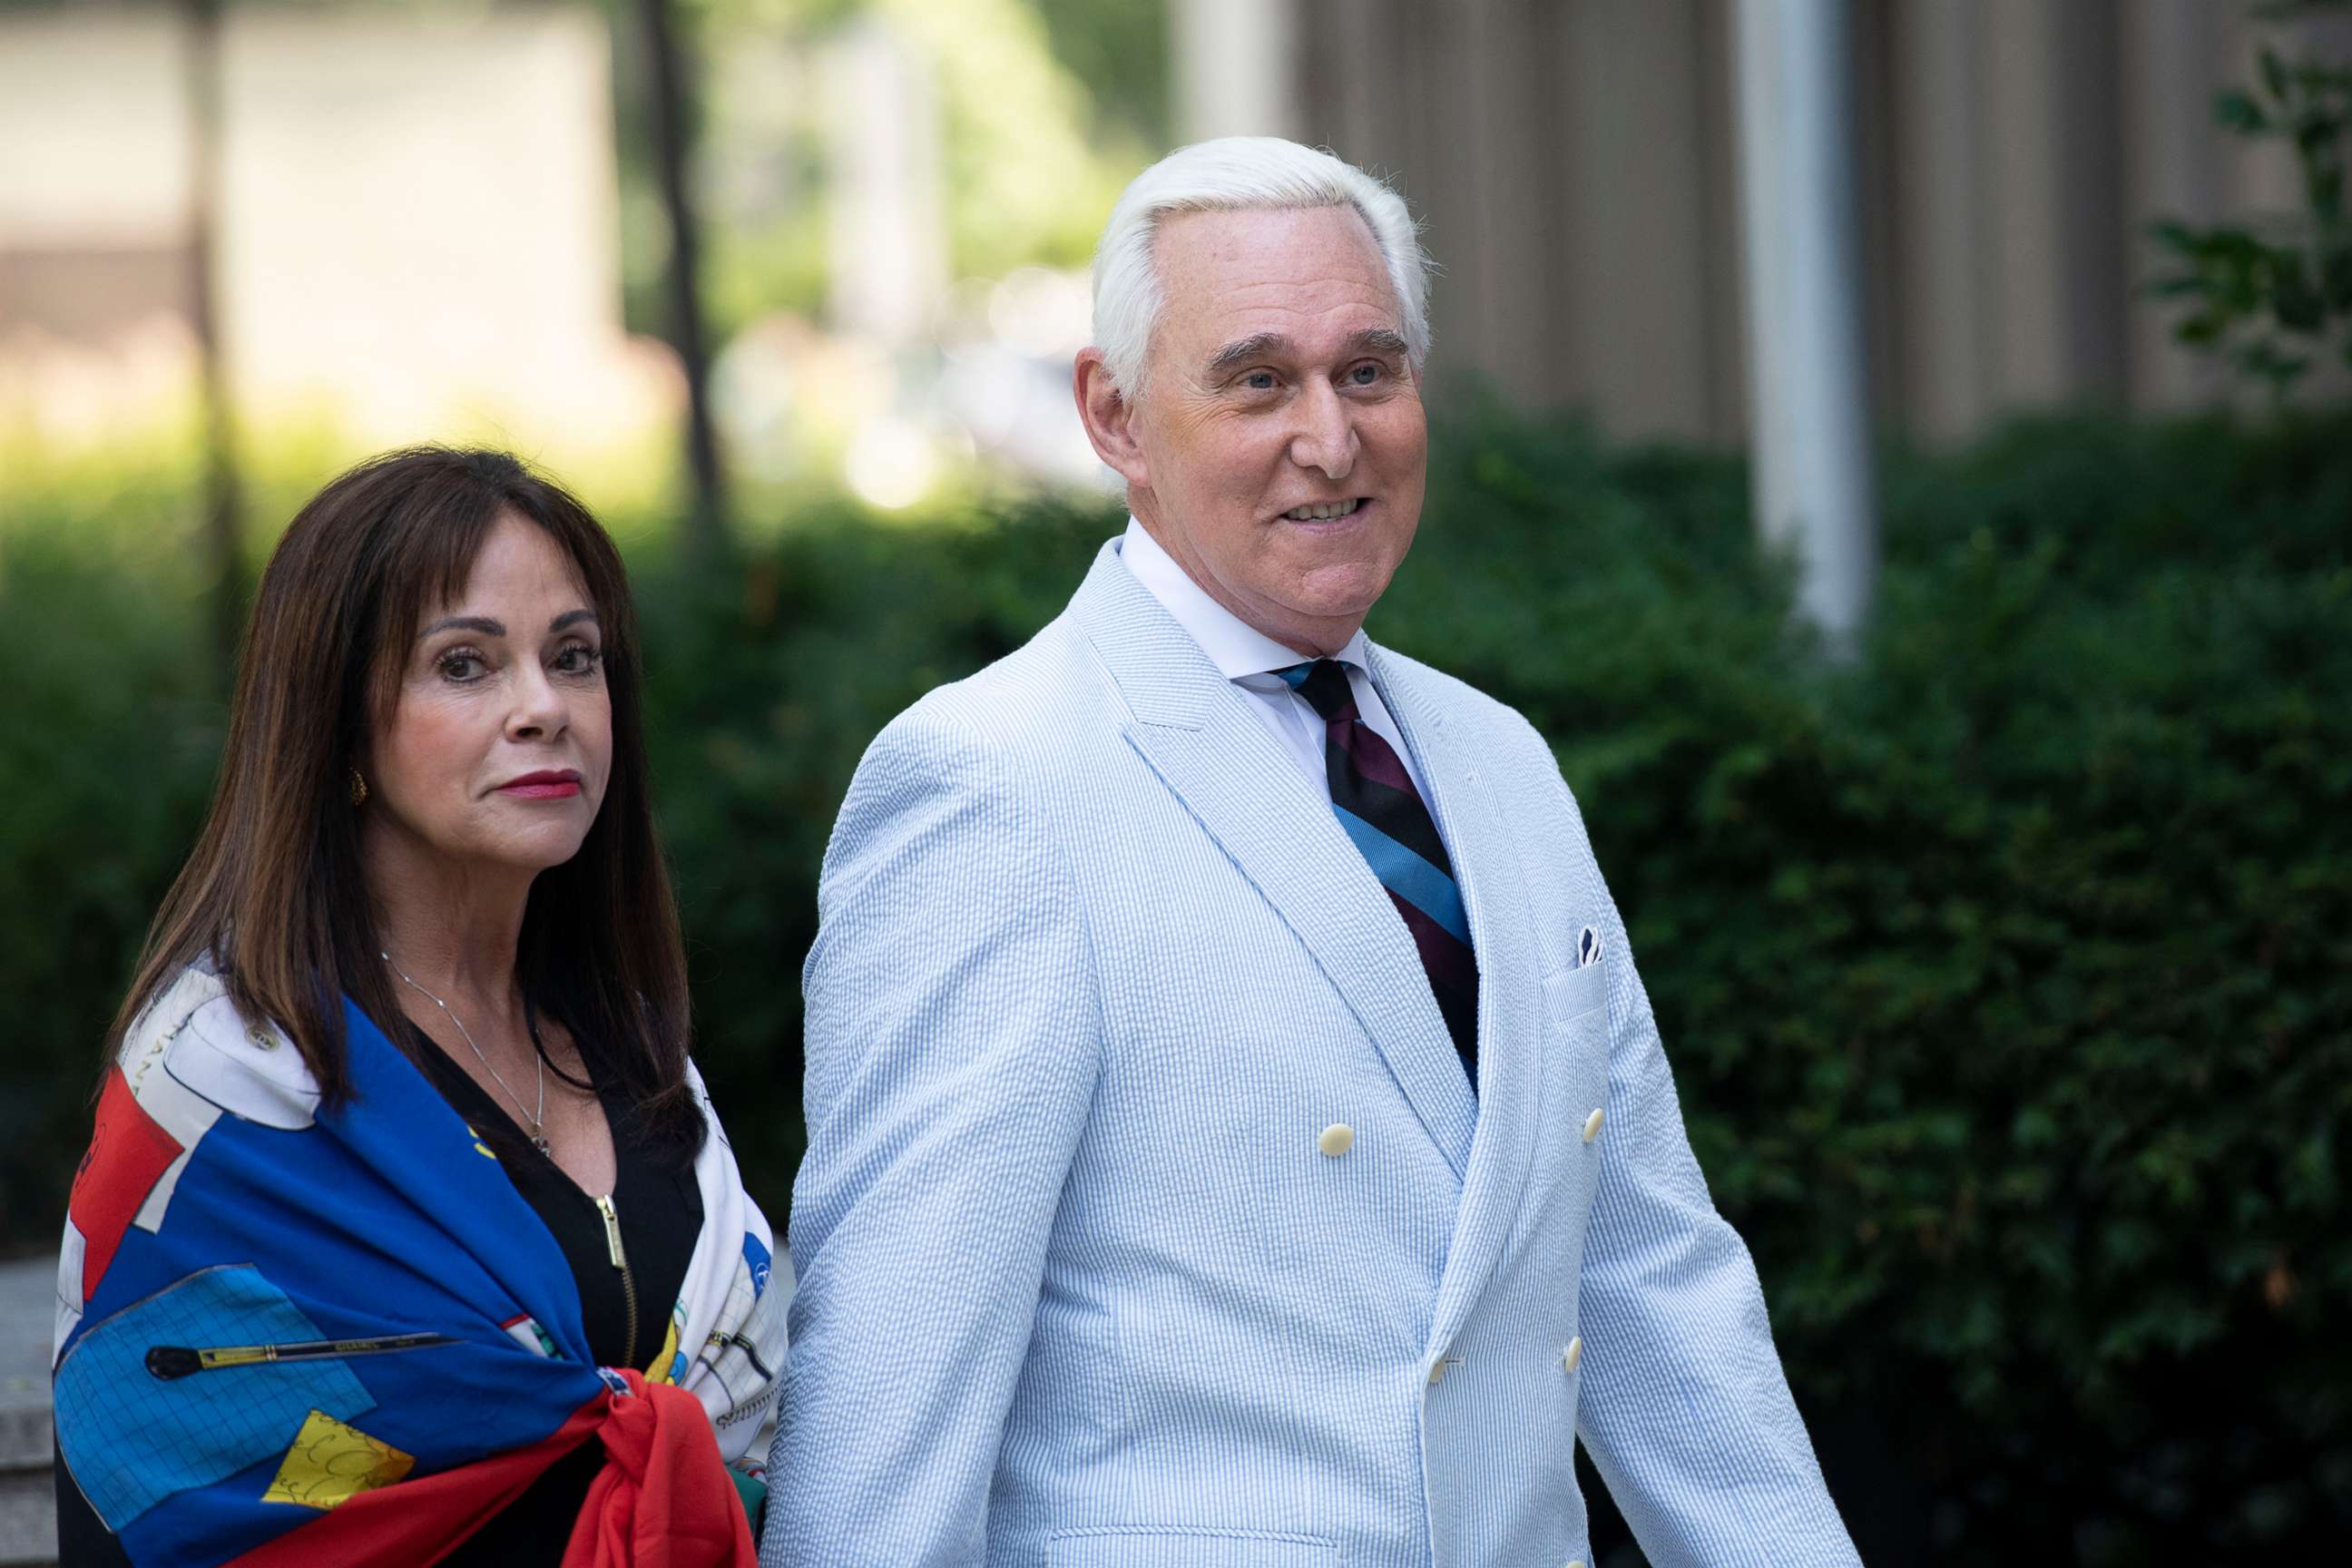 PHOTO: Roger Stone, a longtime confidant of President Donald Trump, accompanied by his wife Nydia Stone, left, arrives at federal court in Washington on July 16, 2019. 